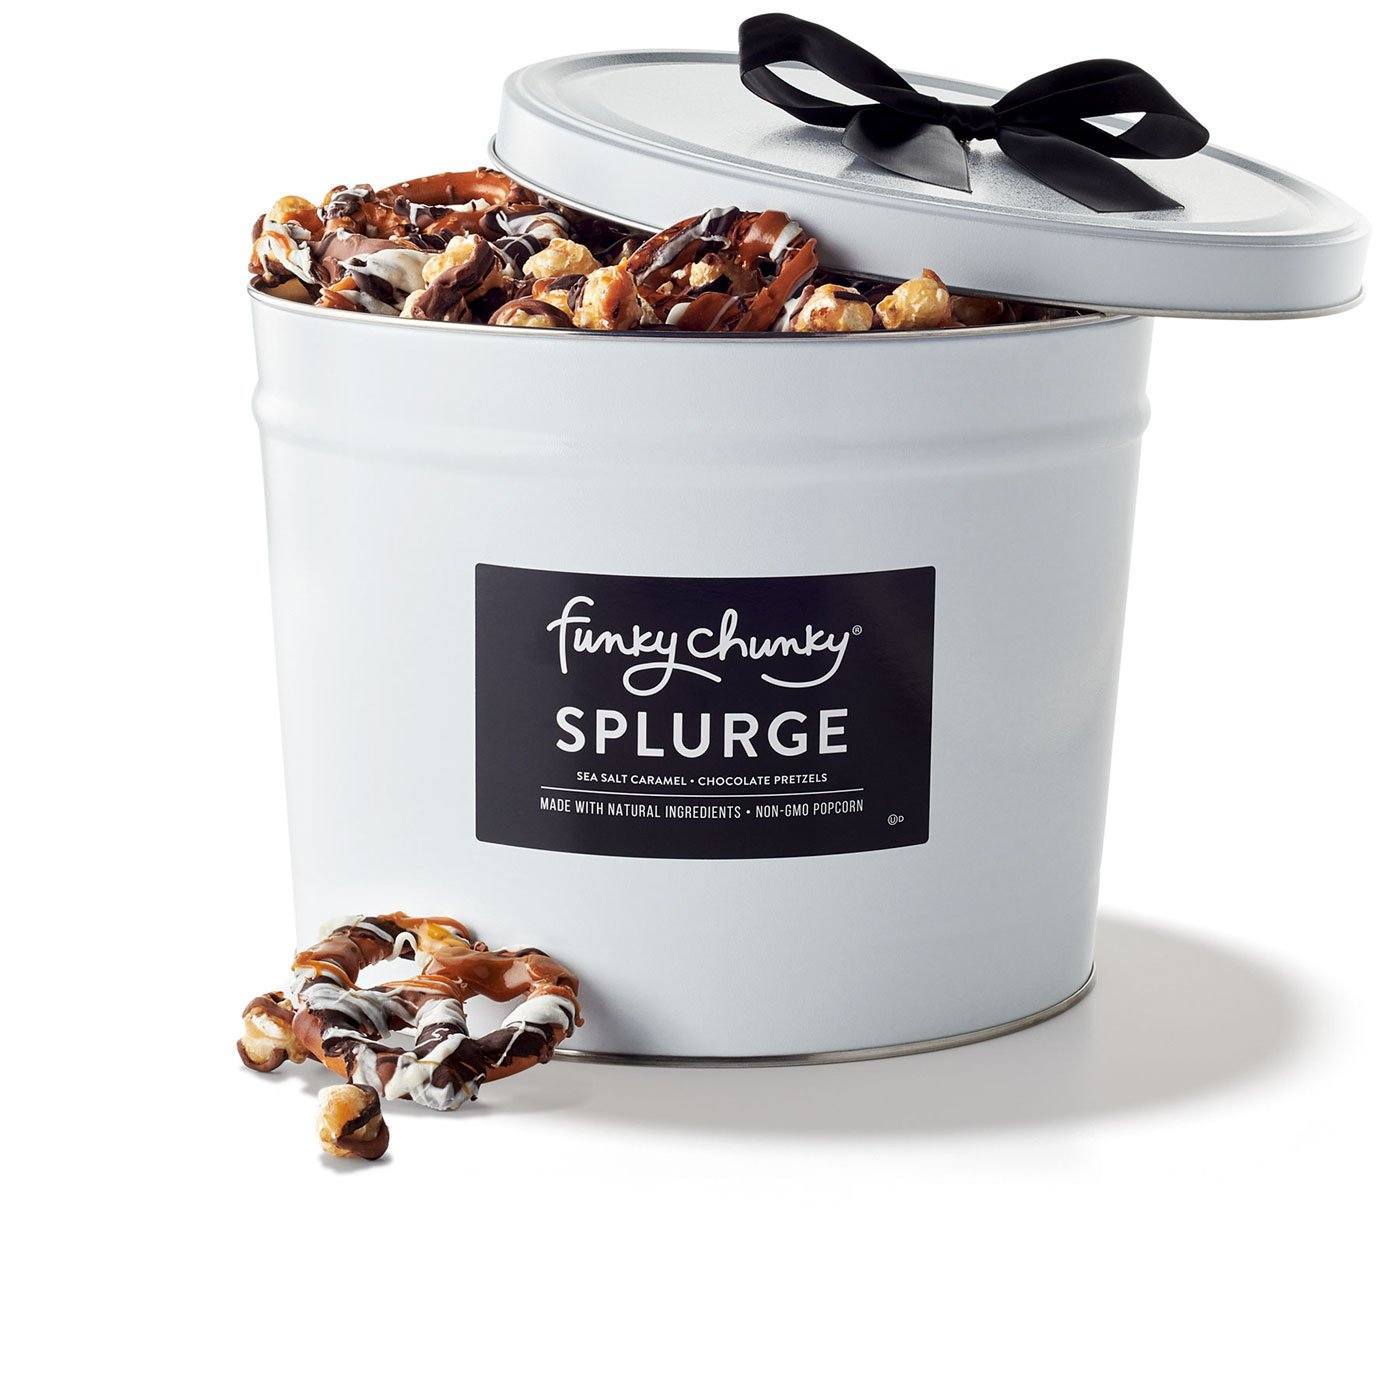 Splurge (4lb.)-Two of our most popular flavors, Sea Salt Caramel Popcorn and Chocolate Pretzels filled to the brim in a sophisticated deluxe gift tin—there’s plenty to go around for all with this “splurge” of a gift.-Funky Chunky